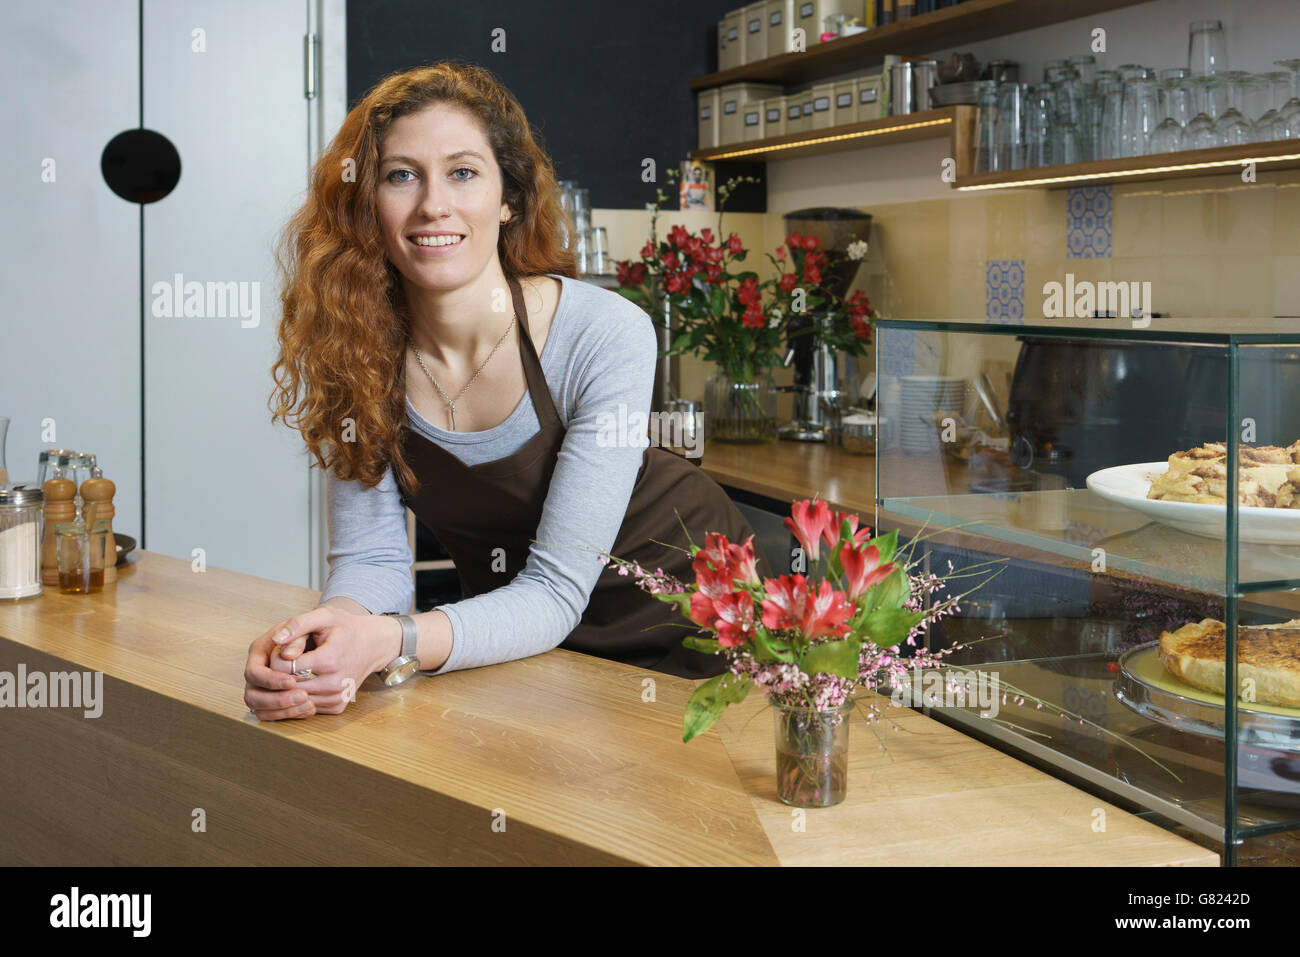 Portrait of smiling young woman standing by table at cafe Stock Photo